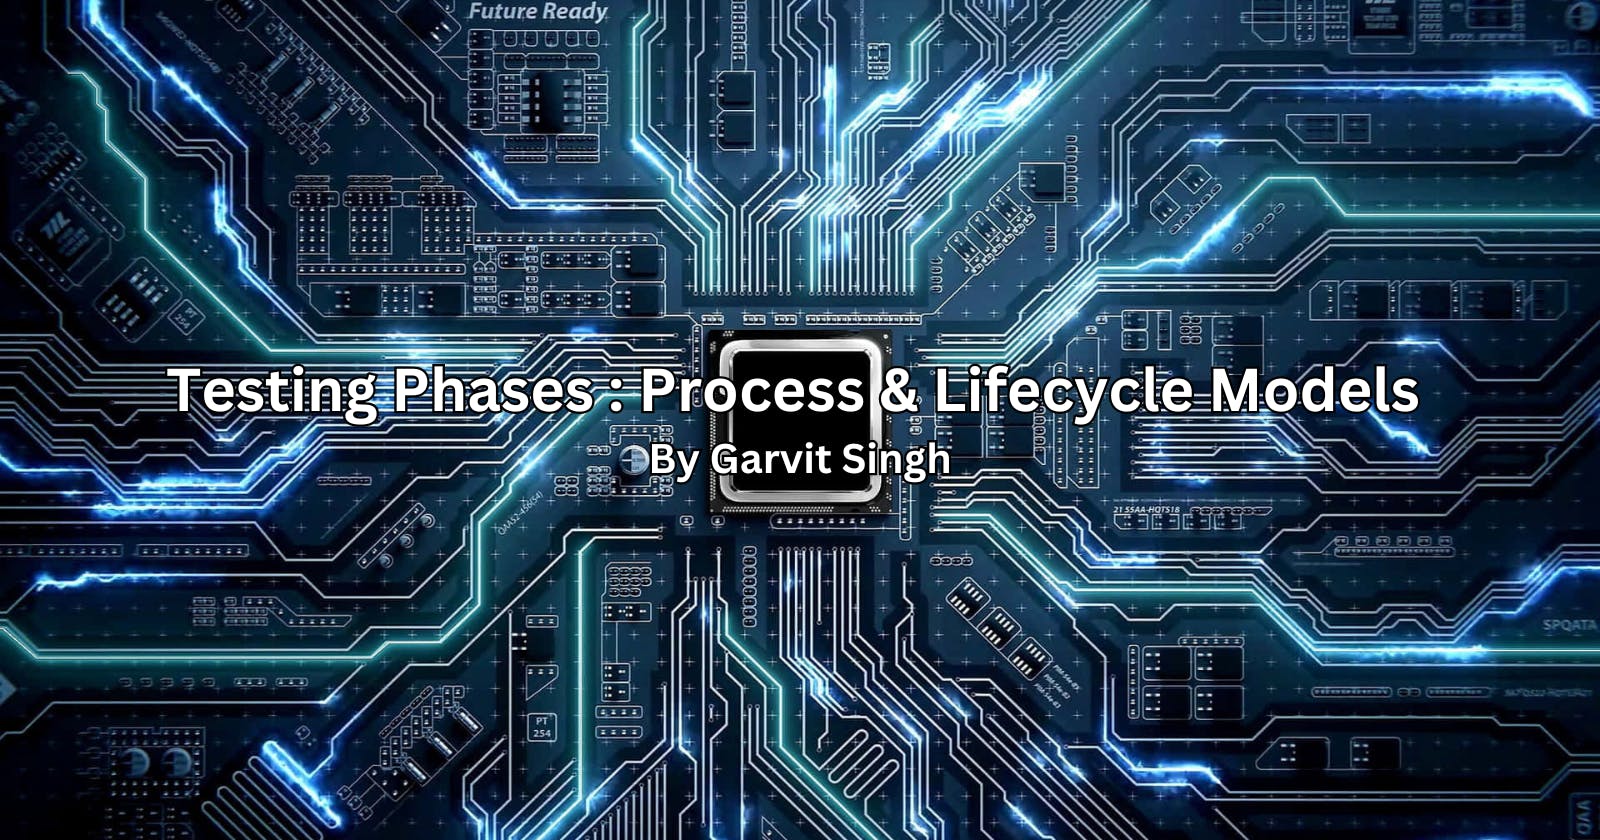 Process & Life Cycle Models For Testing Phases